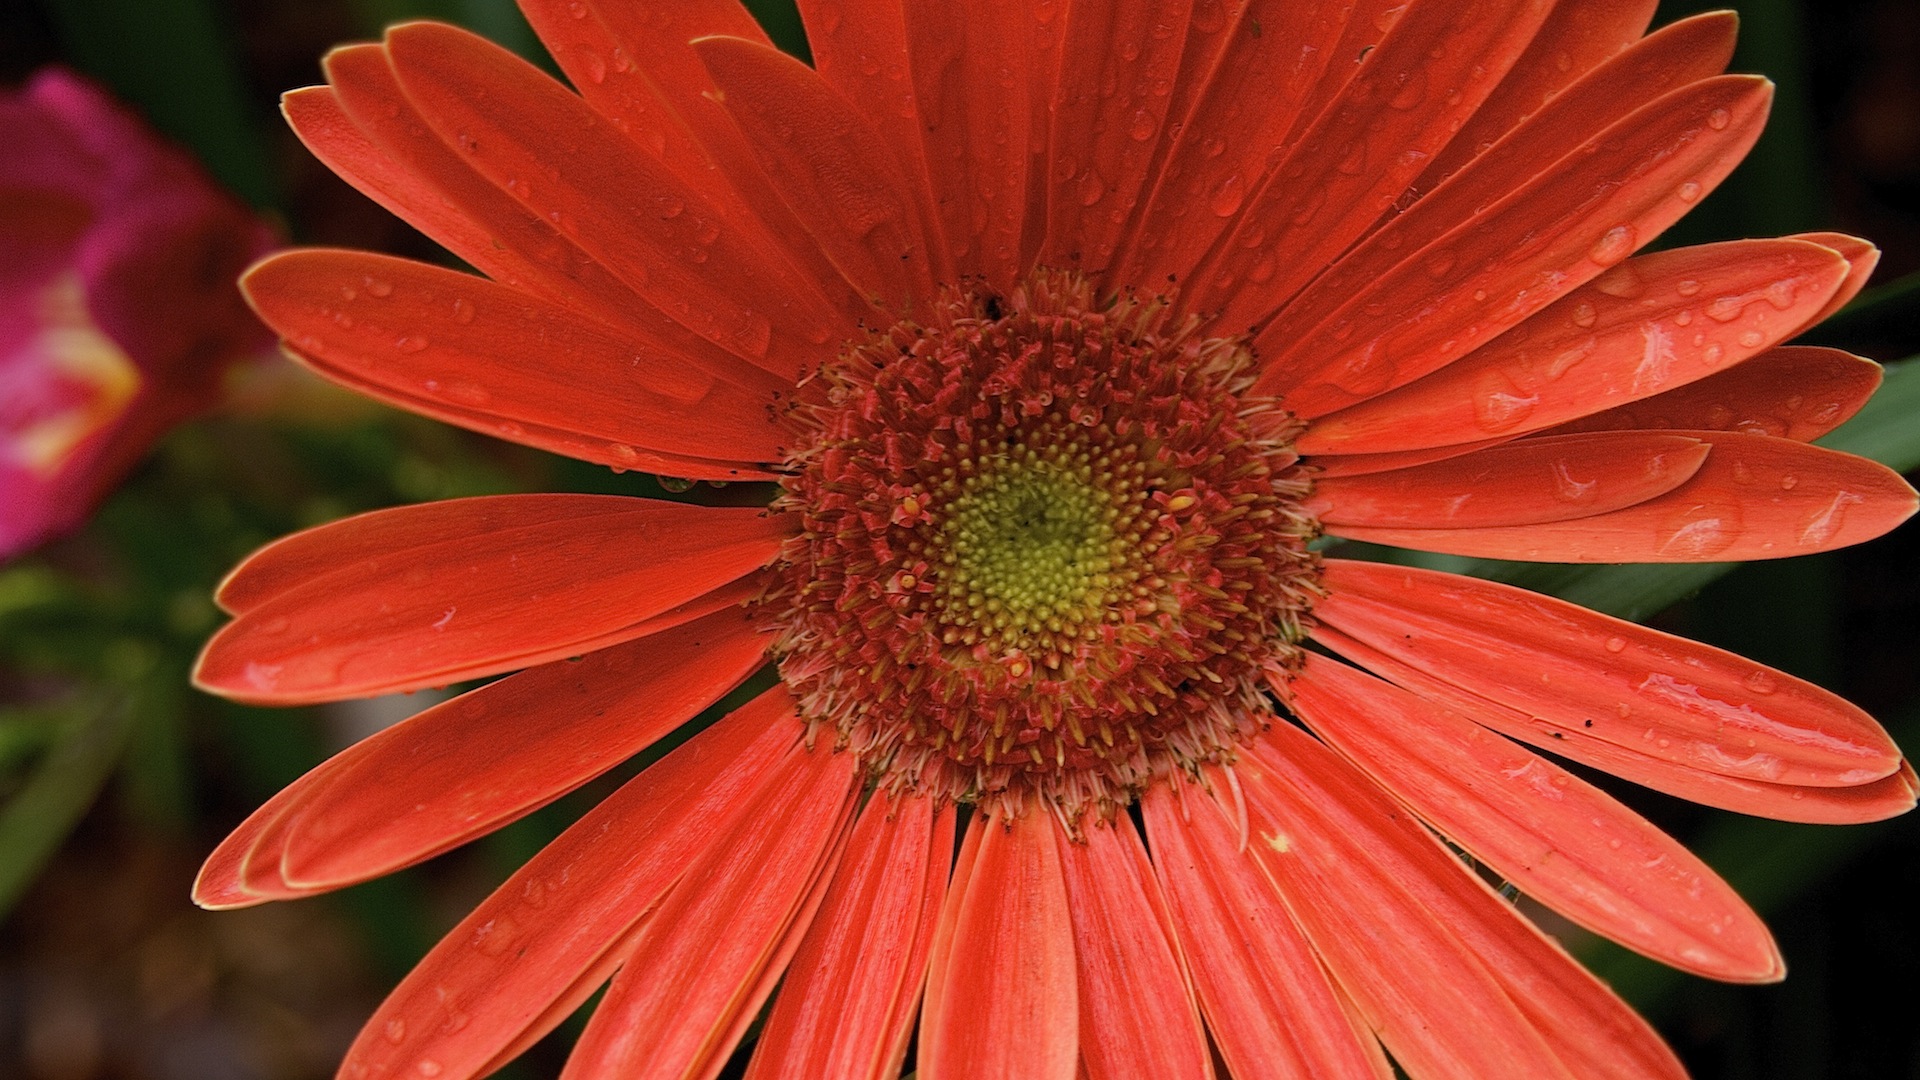 Gerbera Daisy Puter And Smartphone Wallpaper For March